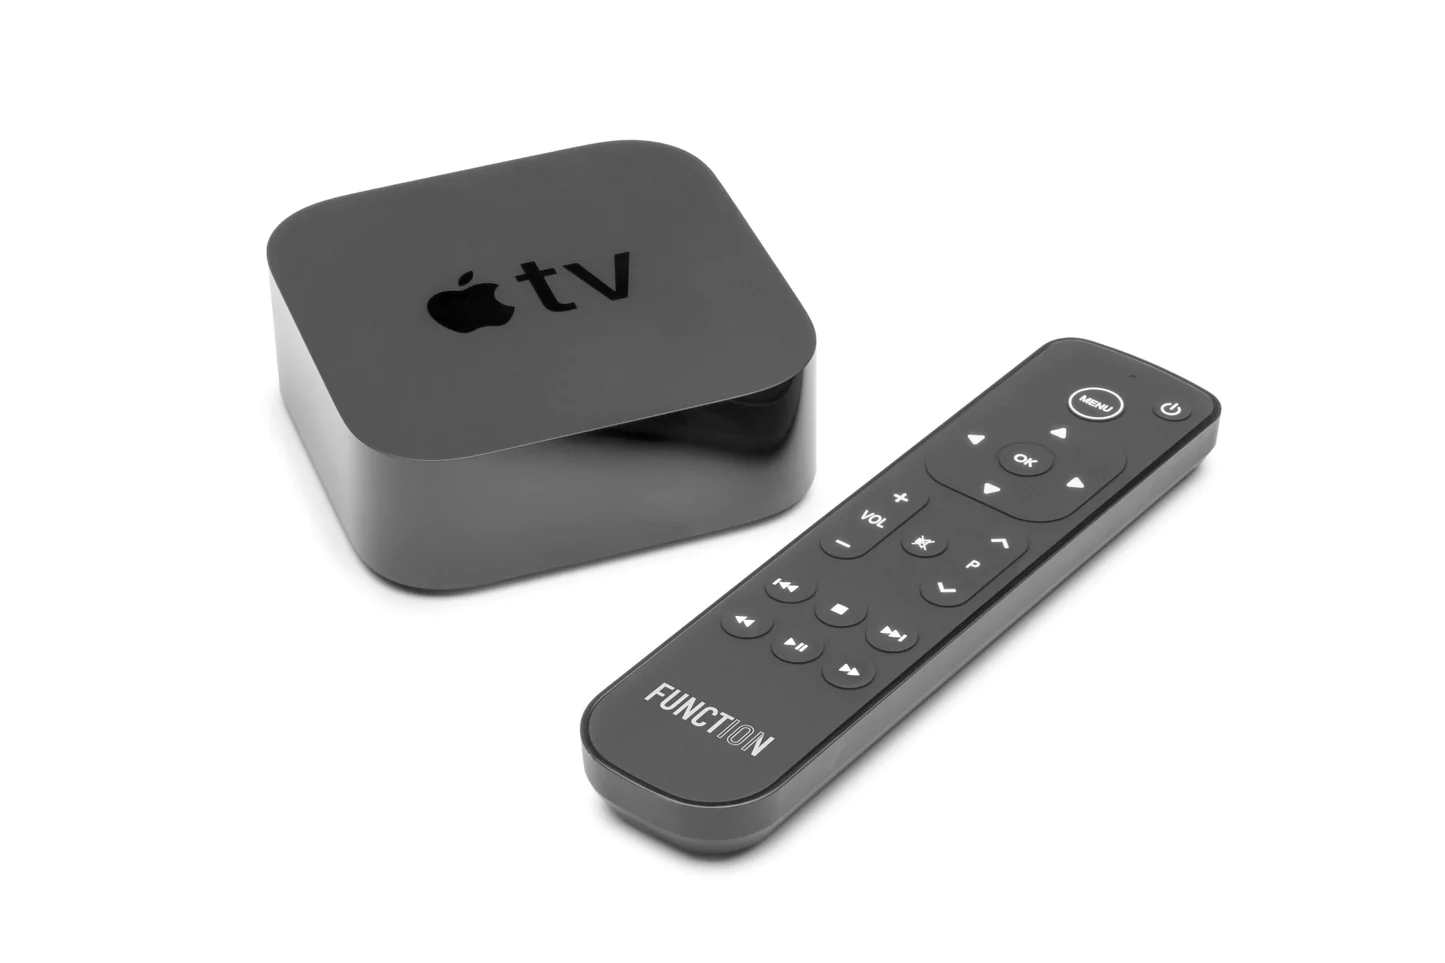 How to Connect Apple TV to WIFI without Remote using standard remote.